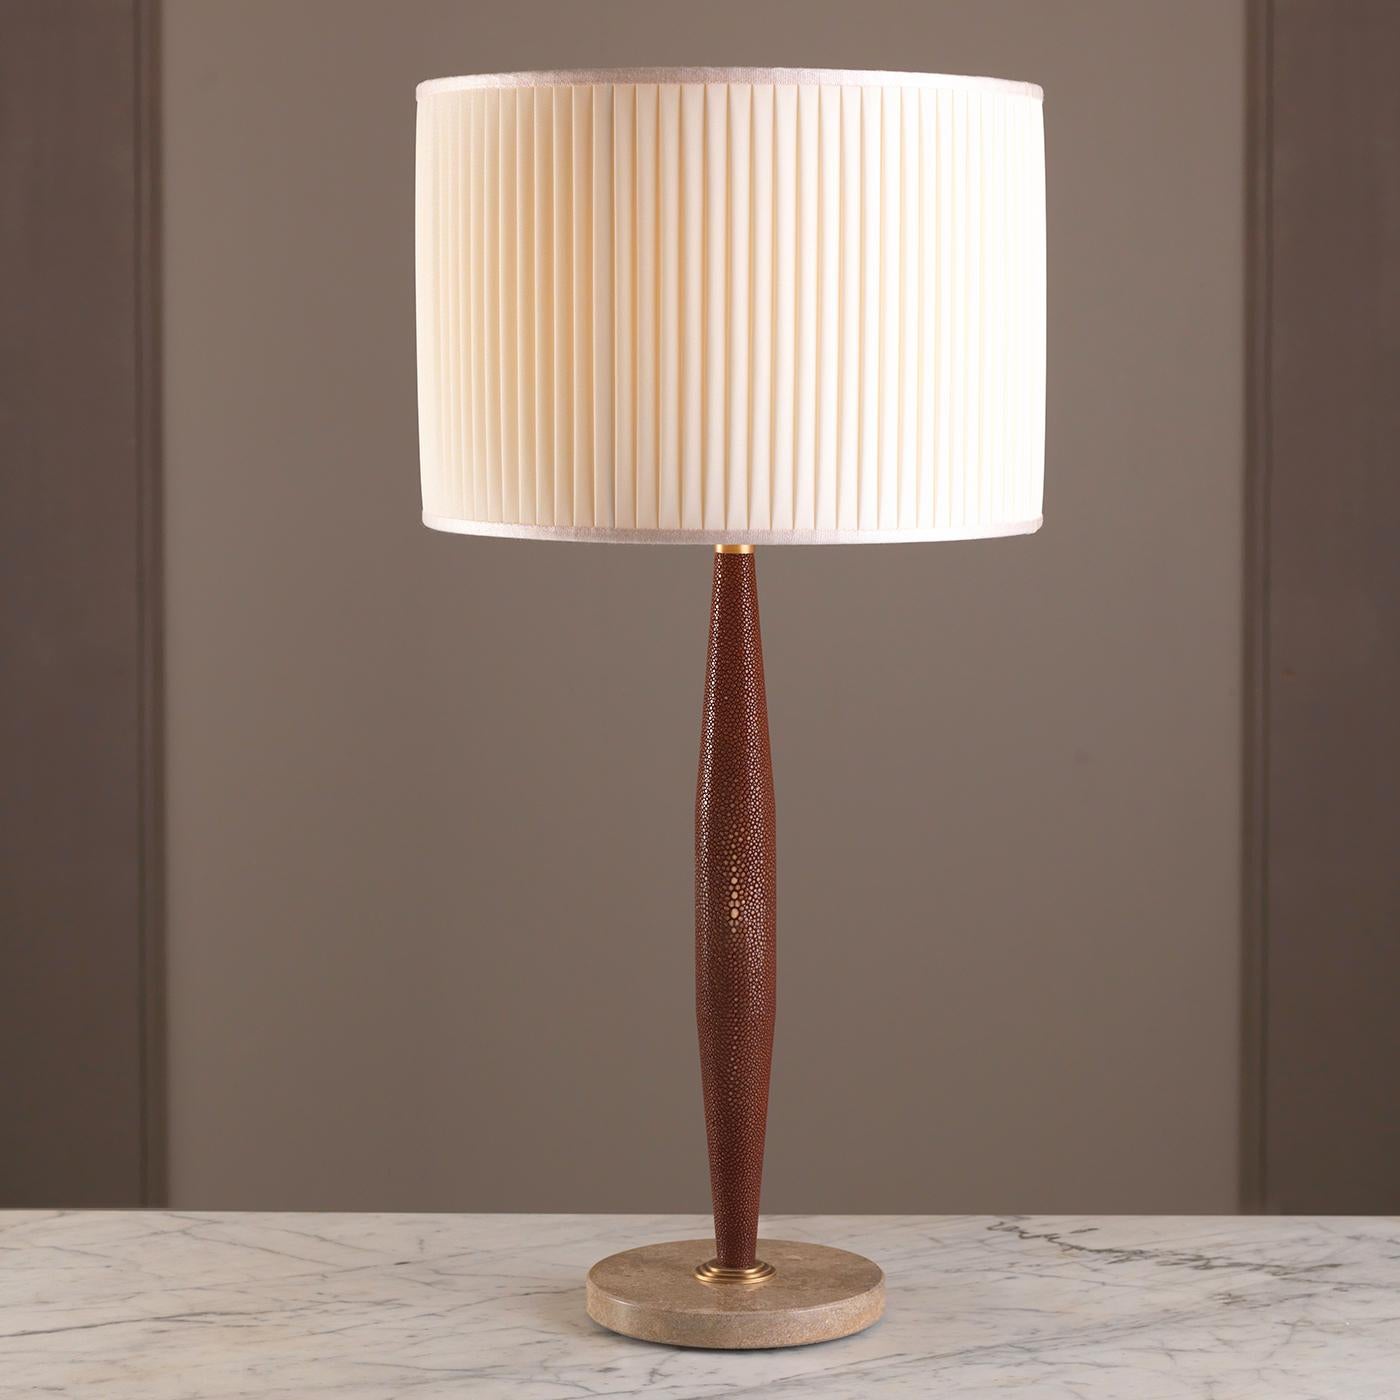 This timeless table lamp is designed by Ciarmoli Queda Studio and features a round Travertino marble base with a vertical stem tapered on both sides completely upholstered in stingray skin with top and bottom accents in brass. The drum-shaped shade